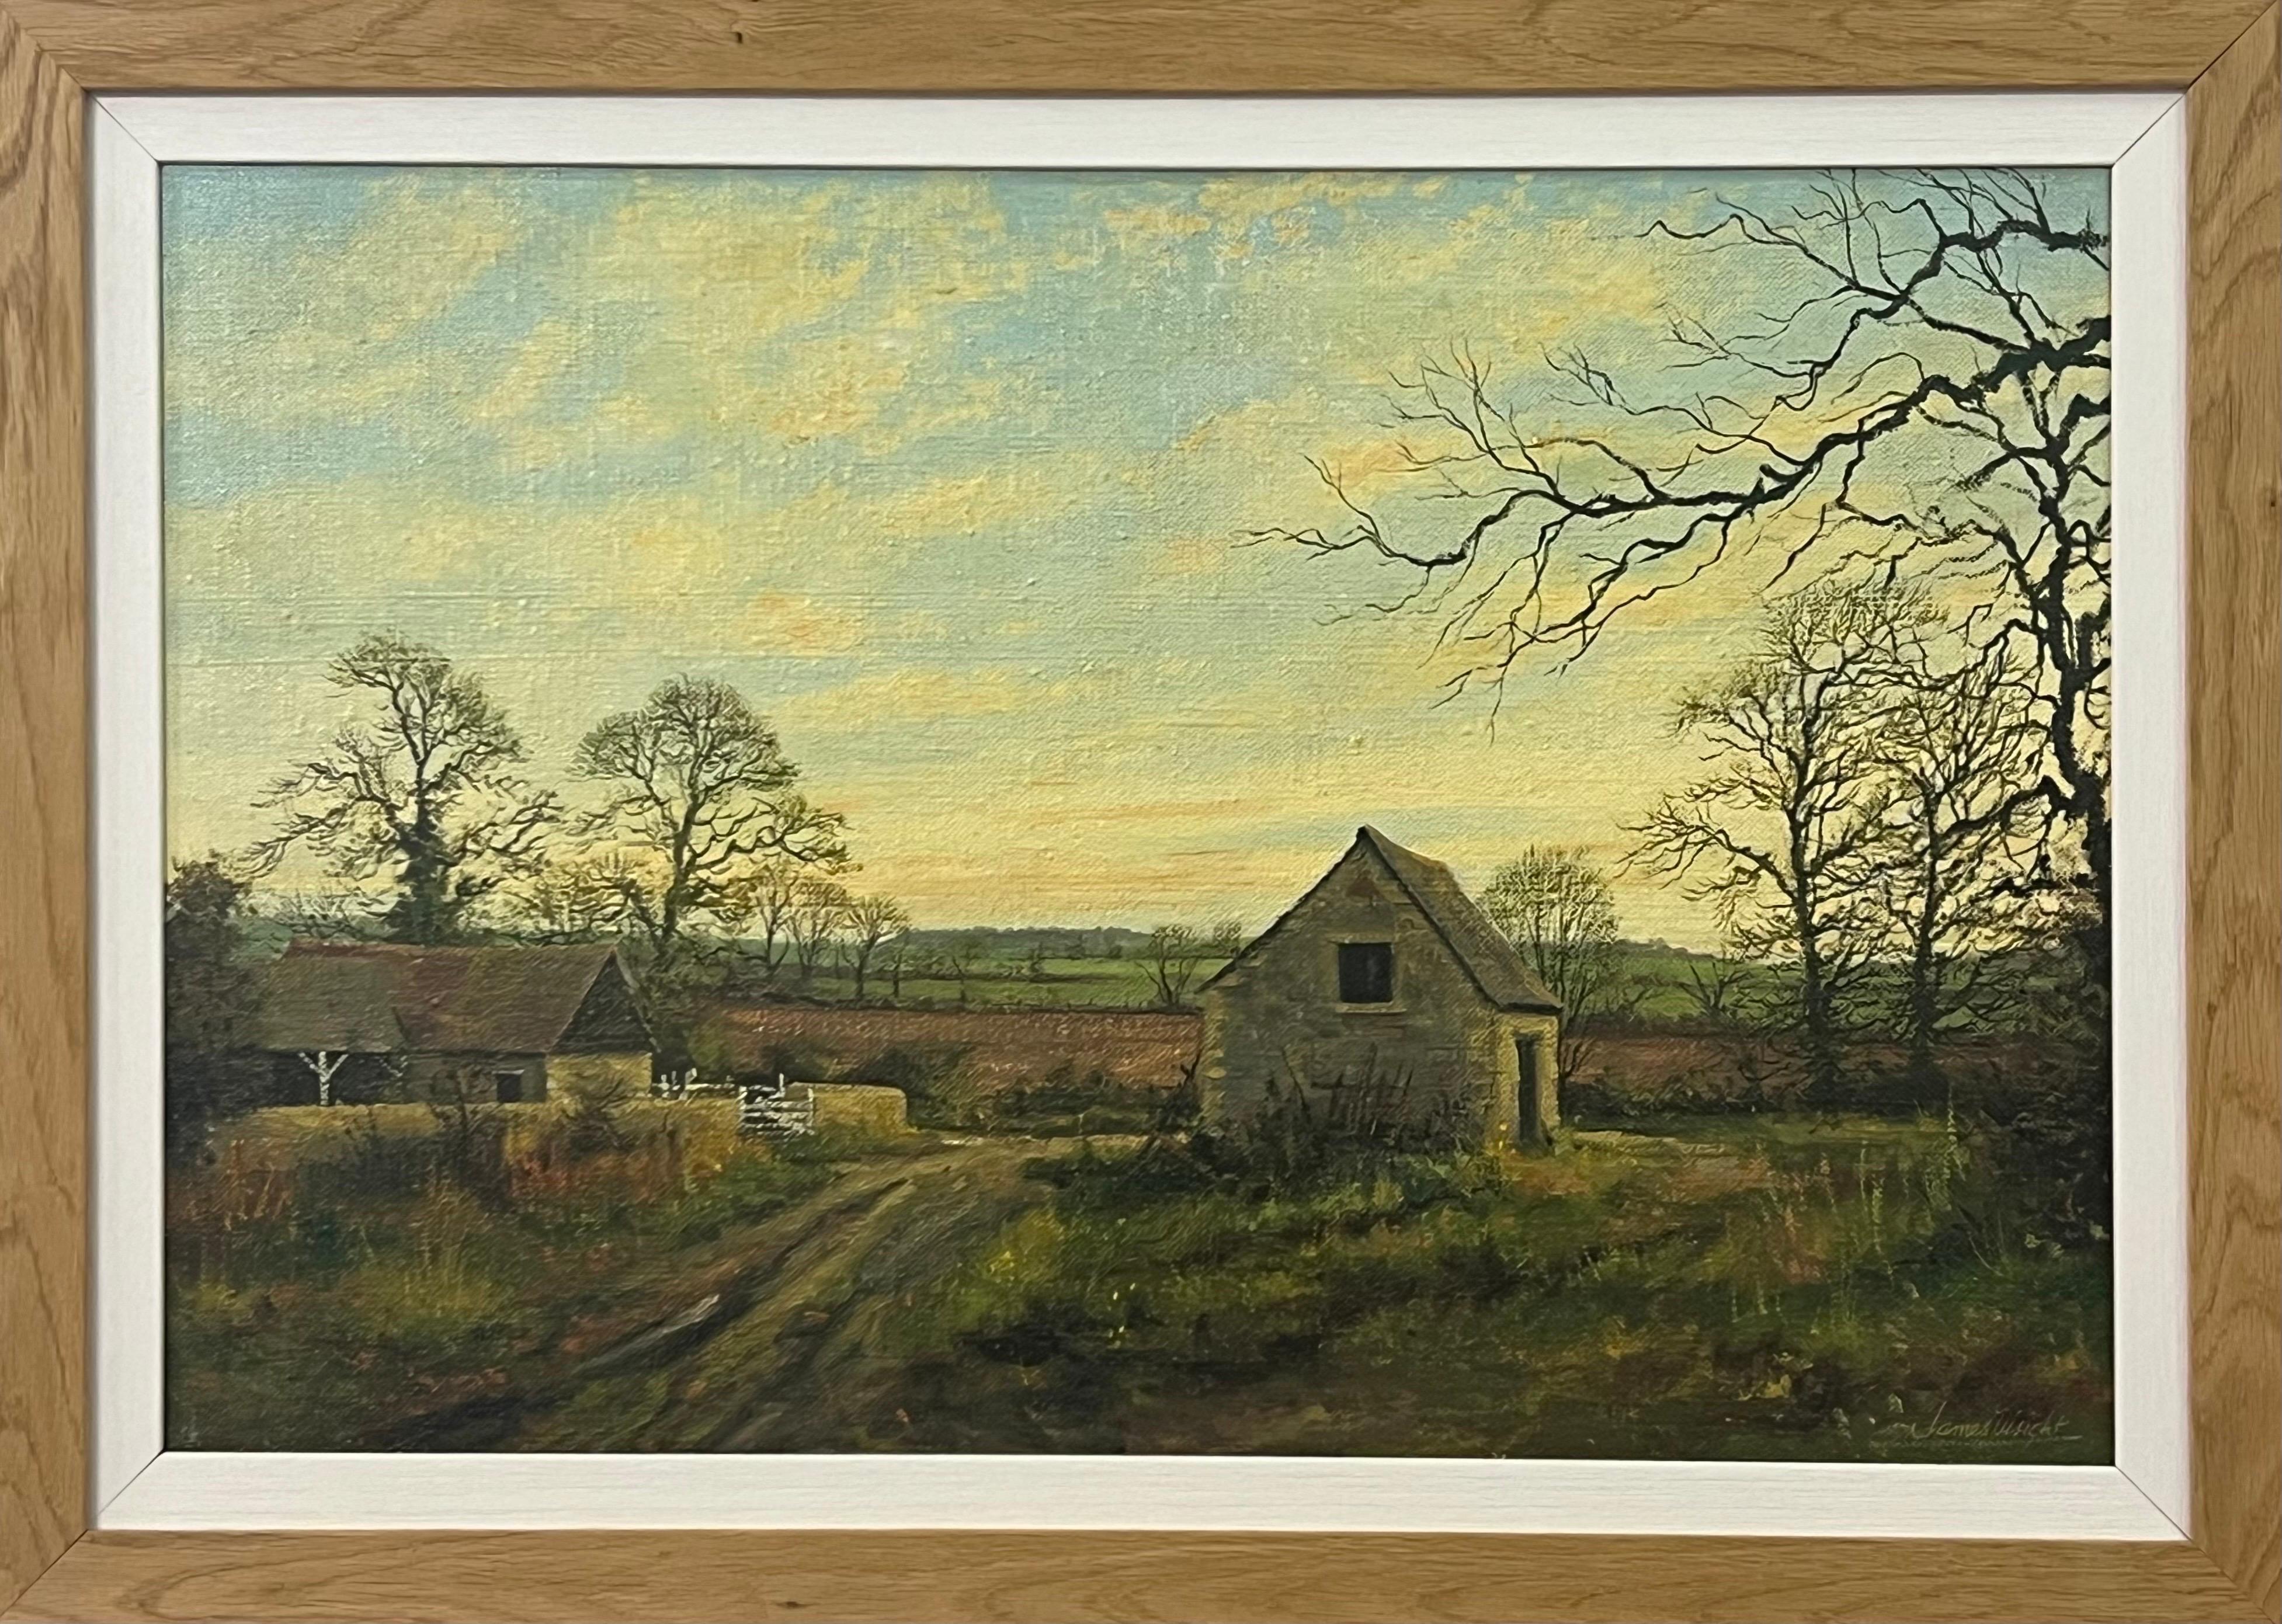 Old Barn Scene of a Farm in the English Countryside by British Landscape Artist